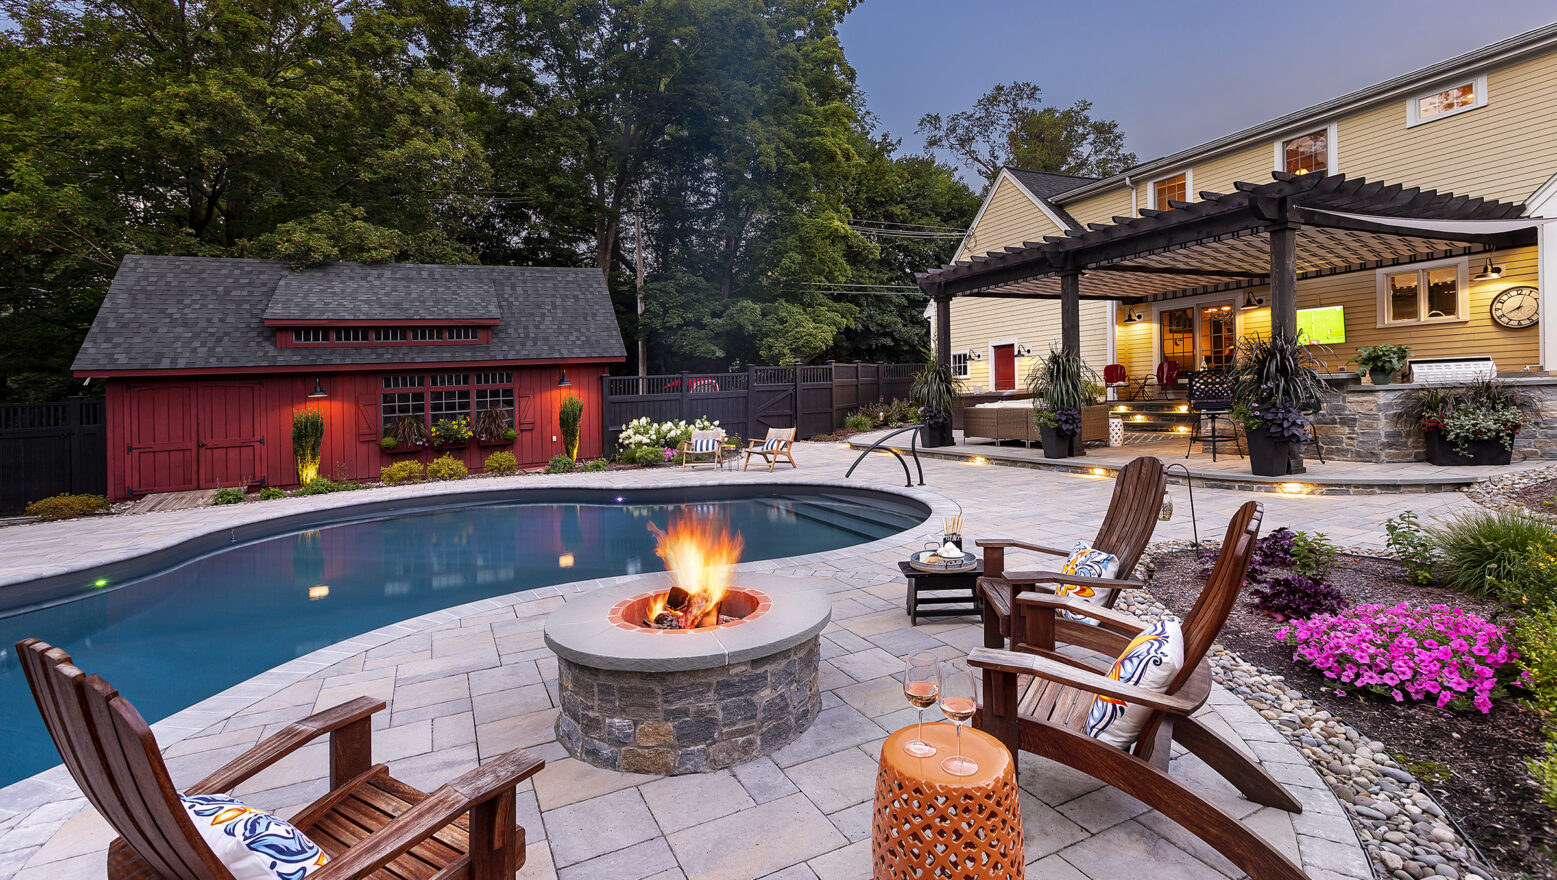 Residential Landscape Design & Build Project in Stow, Massachusetts